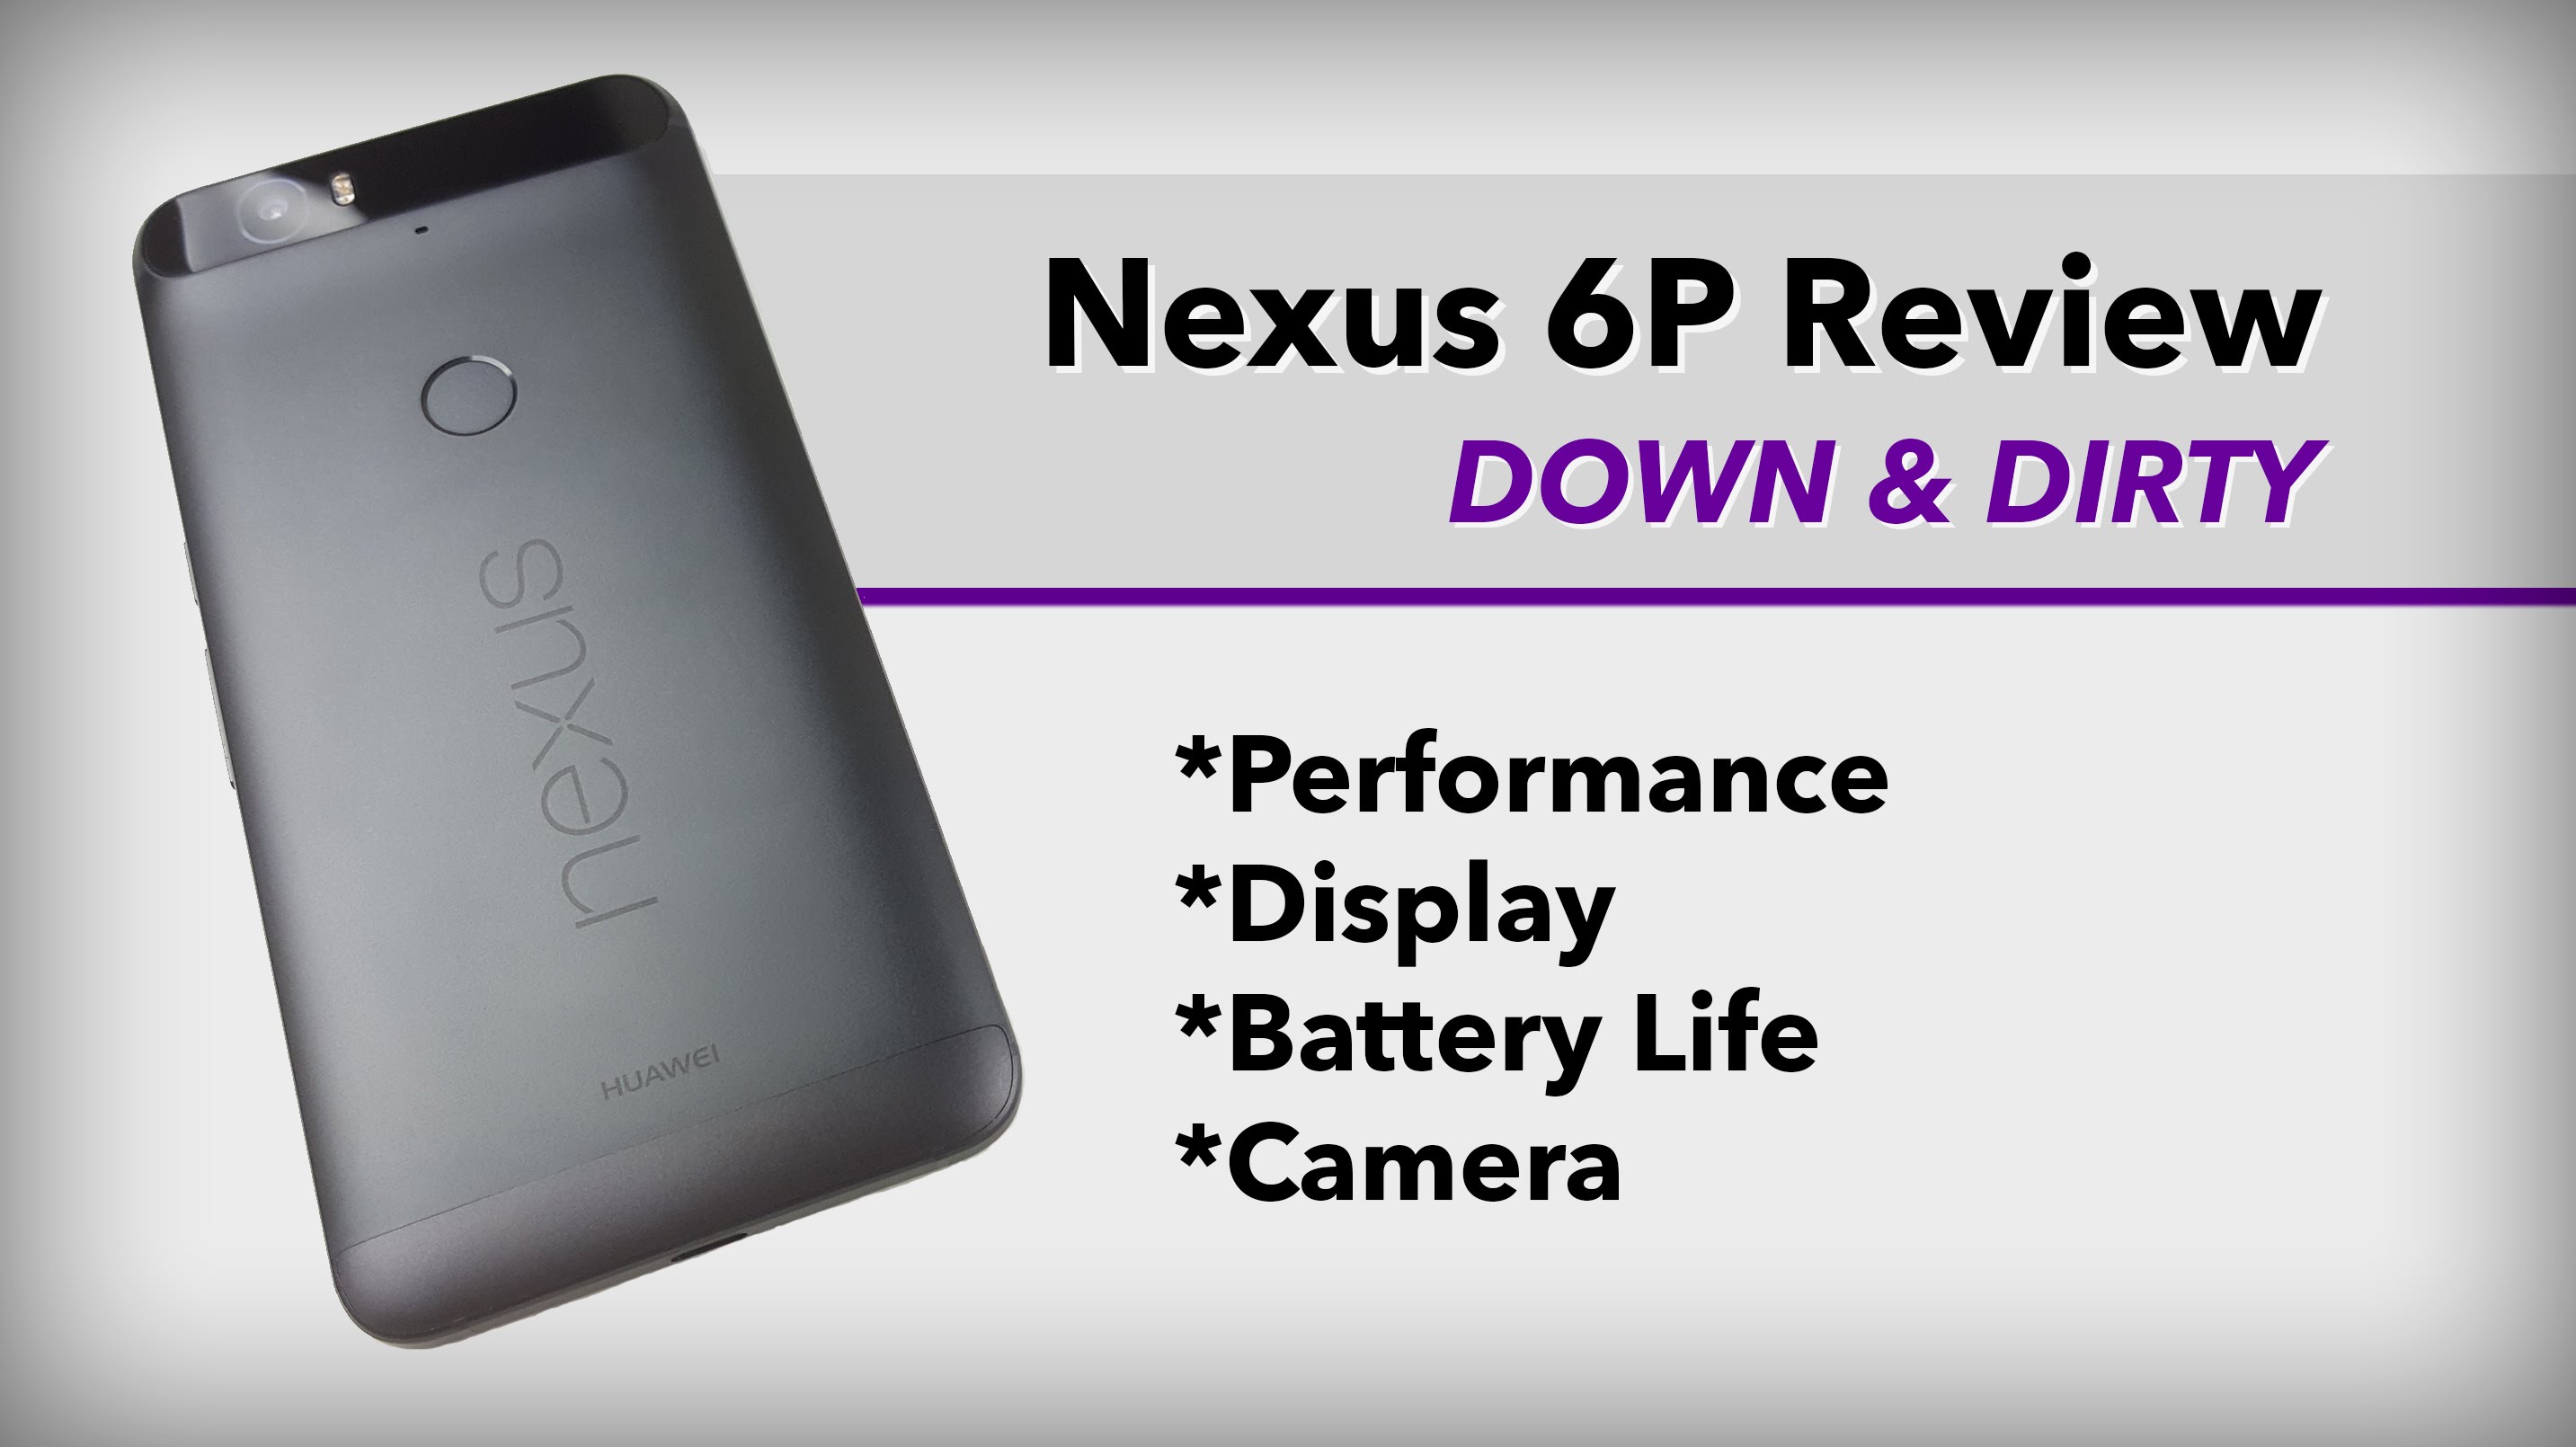 Nexus 6P Review: Down and Dirty